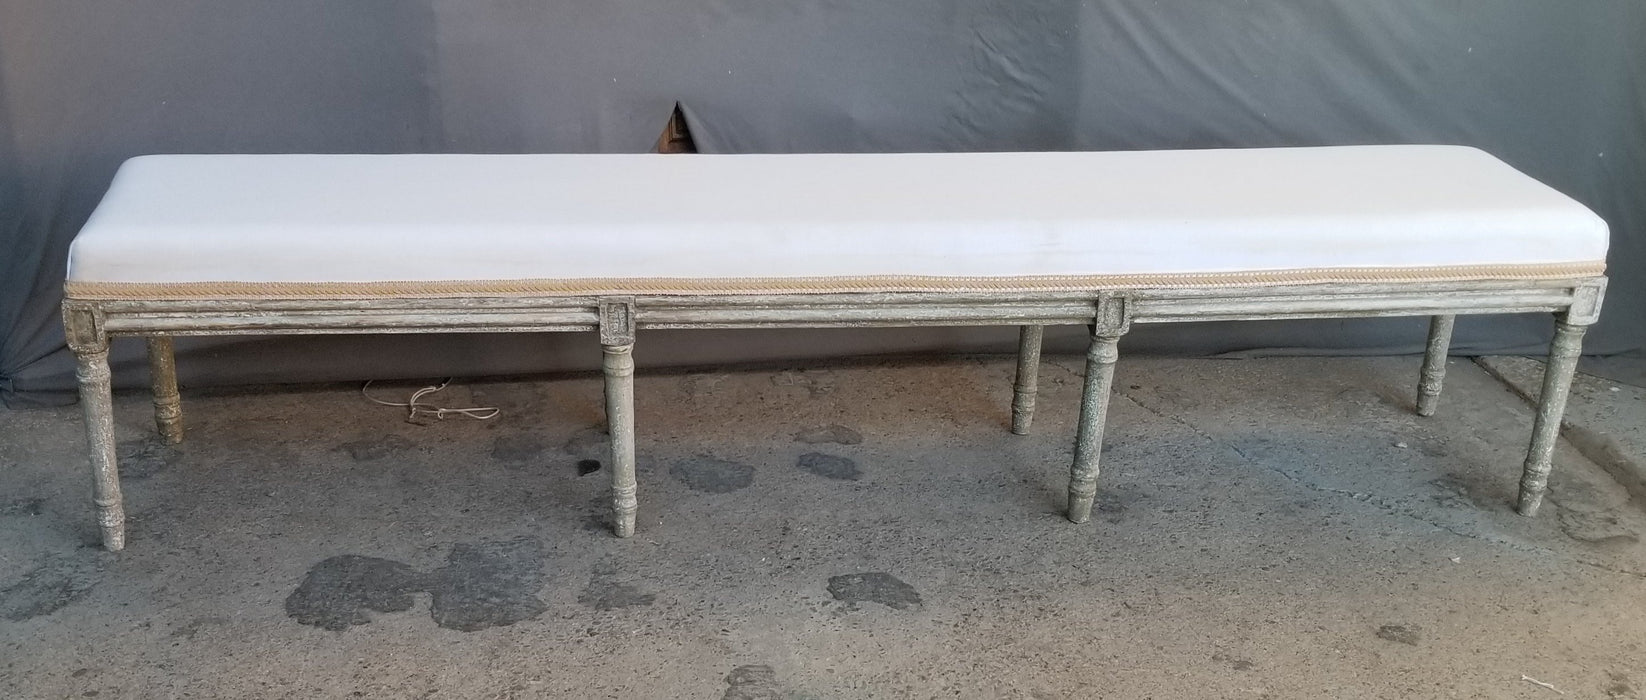 LONG UPHOLSTERED BENCH WITH LEGS  AS  IS LEGS LOOSE